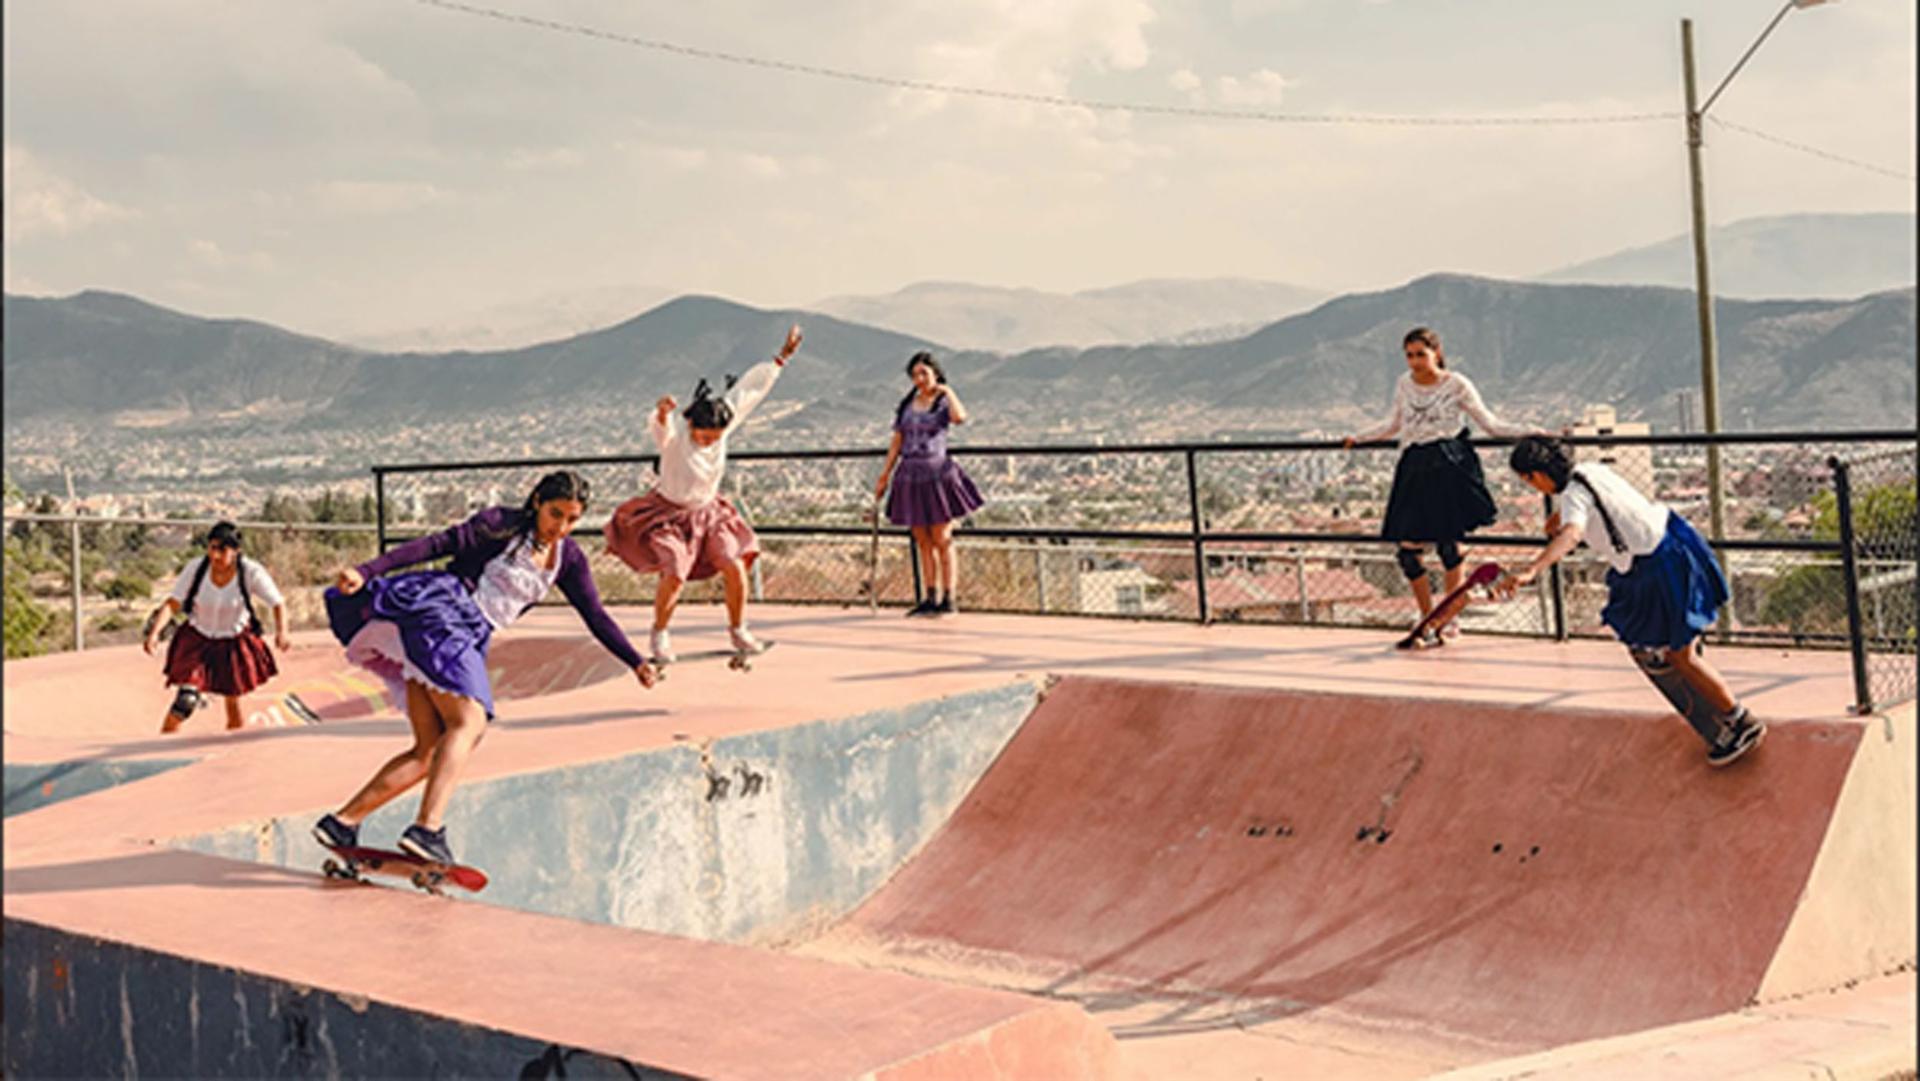 A skatepark in the outskirts of Cochababma, Bolivia